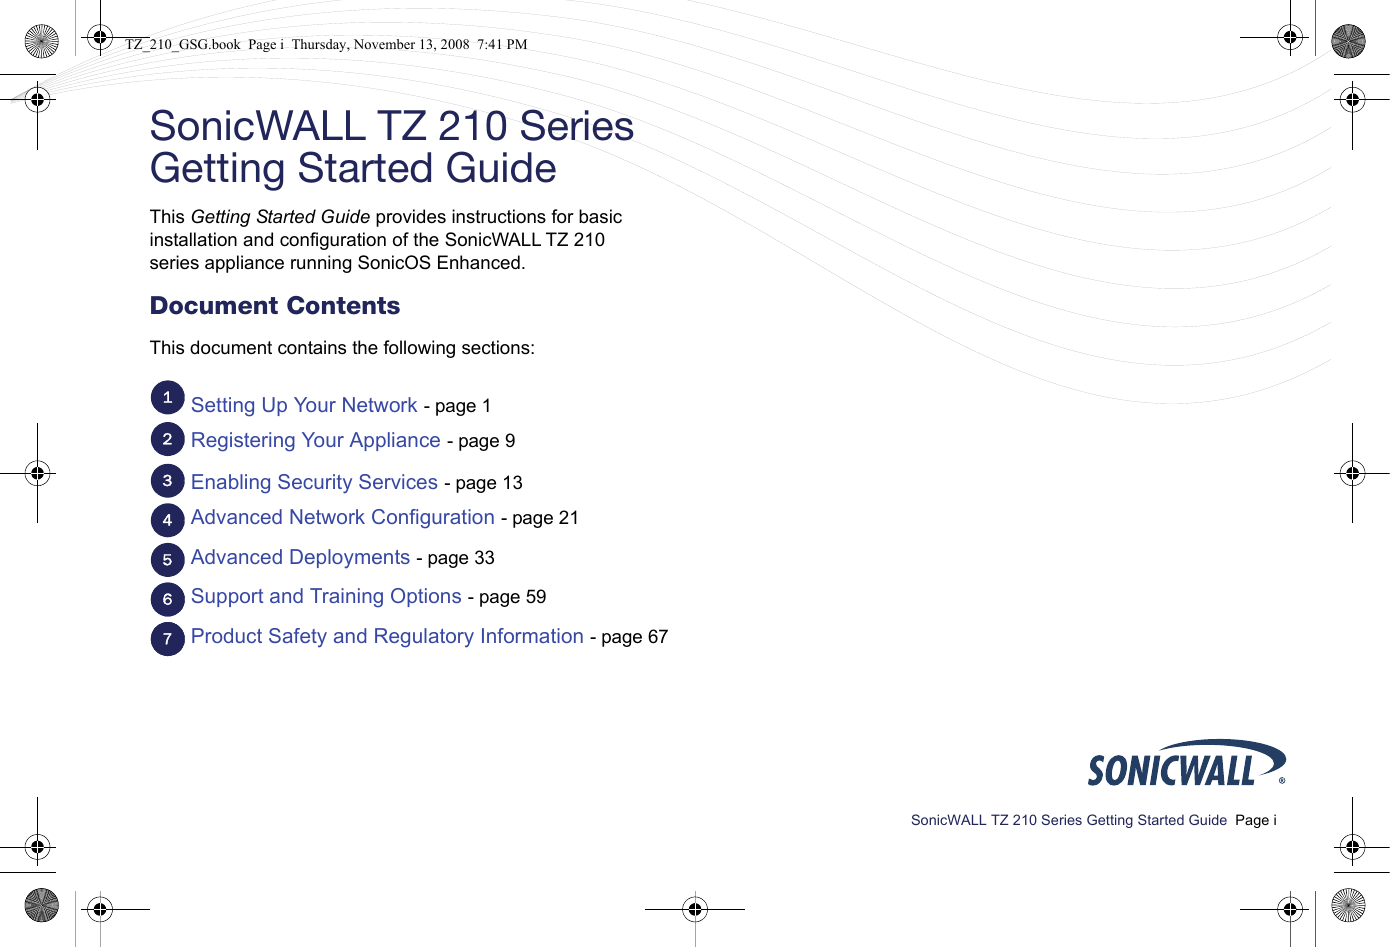 SonicWALL TZ 210 Series Getting Started Guide  Page iSonicWALL TZ 210 SeriesGetting Started GuideThis Getting Started Guide provides instructions for basic installation and configuration of the SonicWALL TZ 210 series appliance running SonicOS Enhanced.Document ContentsThis document contains the following sections:Setting Up Your Network - page 1Registering Your Appliance - page 9Enabling Security Services - page 13Advanced Network Configuration - page 21Advanced Deployments - page 33Support and Training Options - page 59Product Safety and Regulatory Information - page 67123456677TZ_210_GSG.book  Page i  Thursday, November 13, 2008  7:41 PM